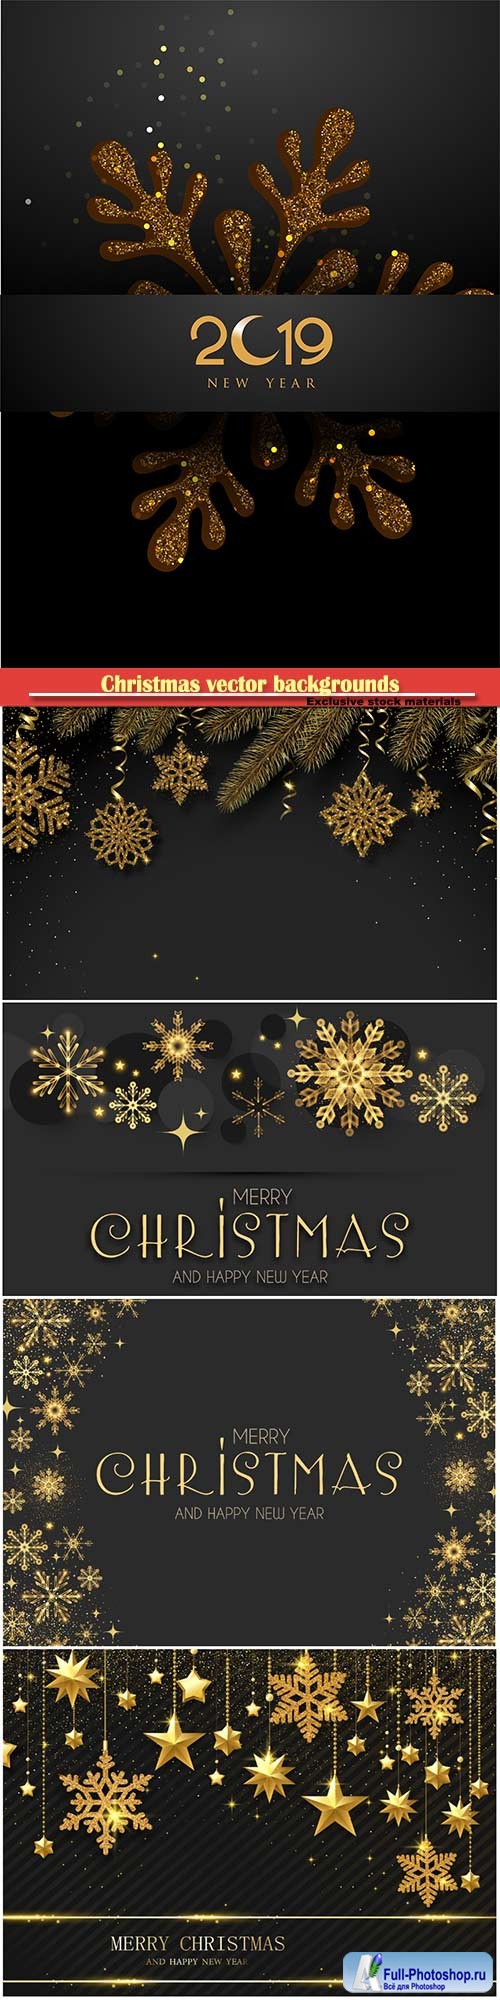 Christmas vector backgrounds with golden decor